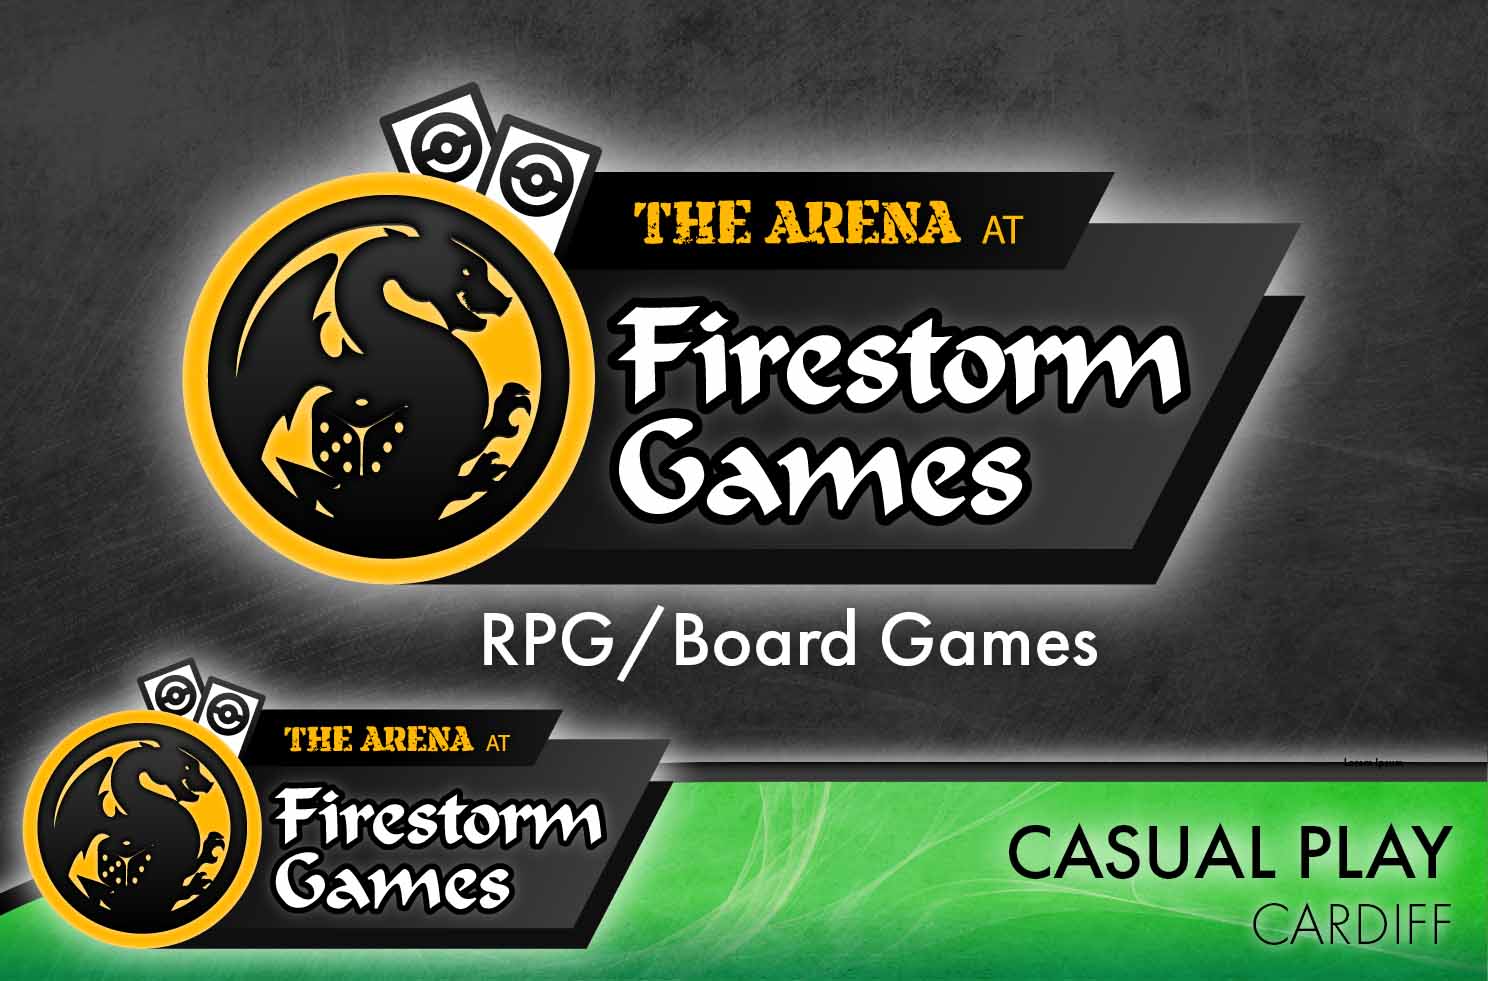 The Arena Wednesday RPG/Board Game Ticket